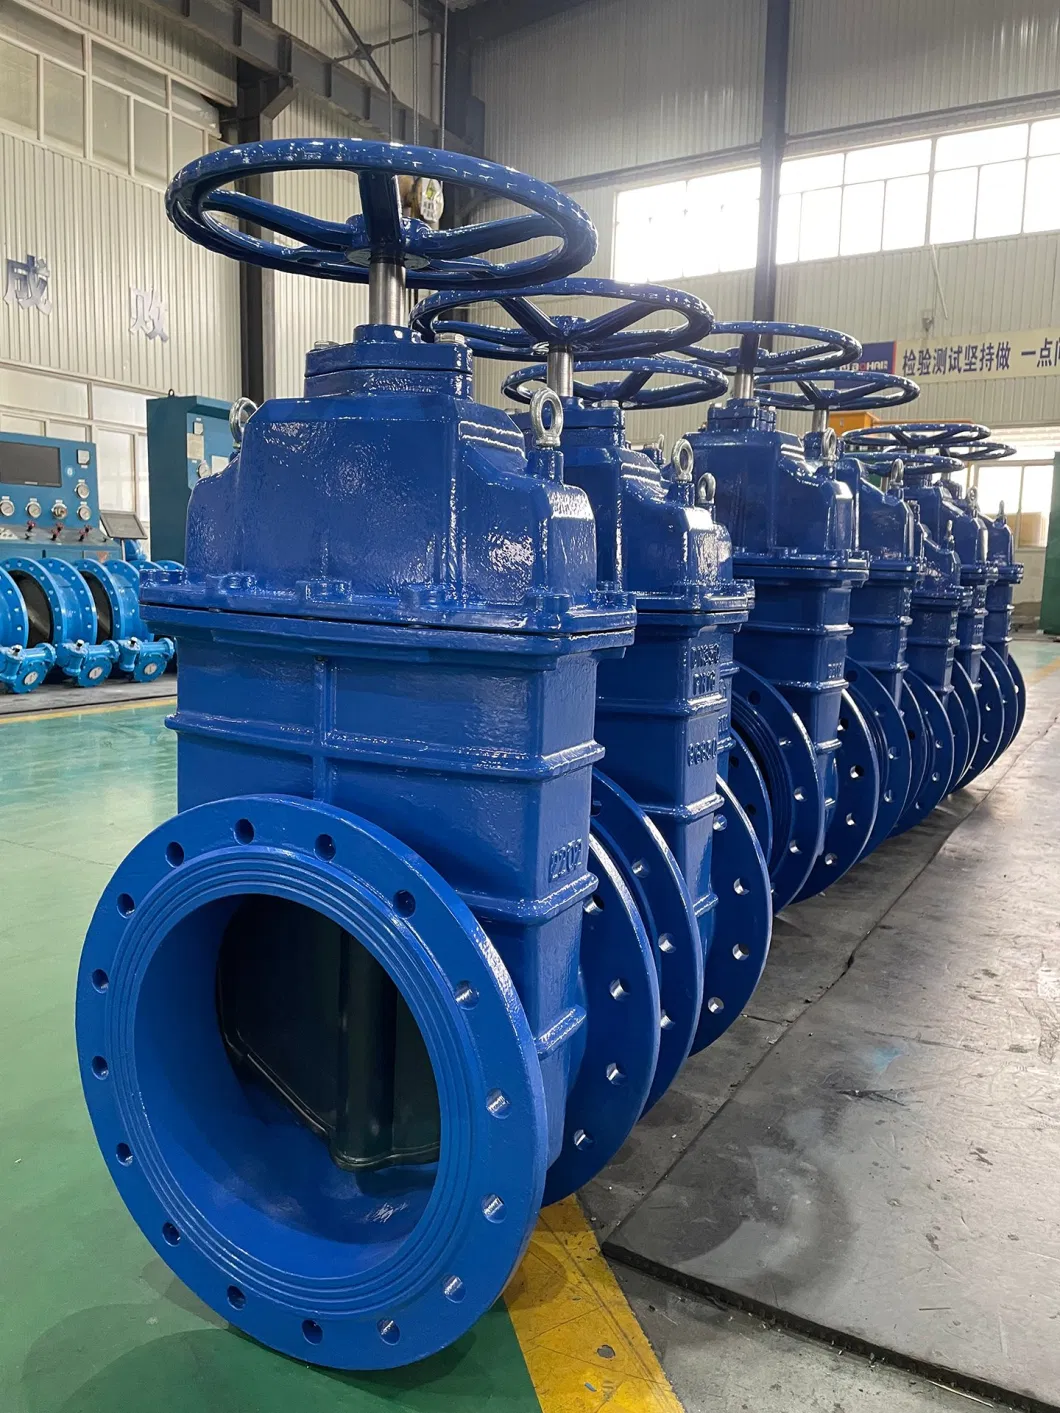 Buried Underground Extended Long Stem Ductile Iron Gate Valve